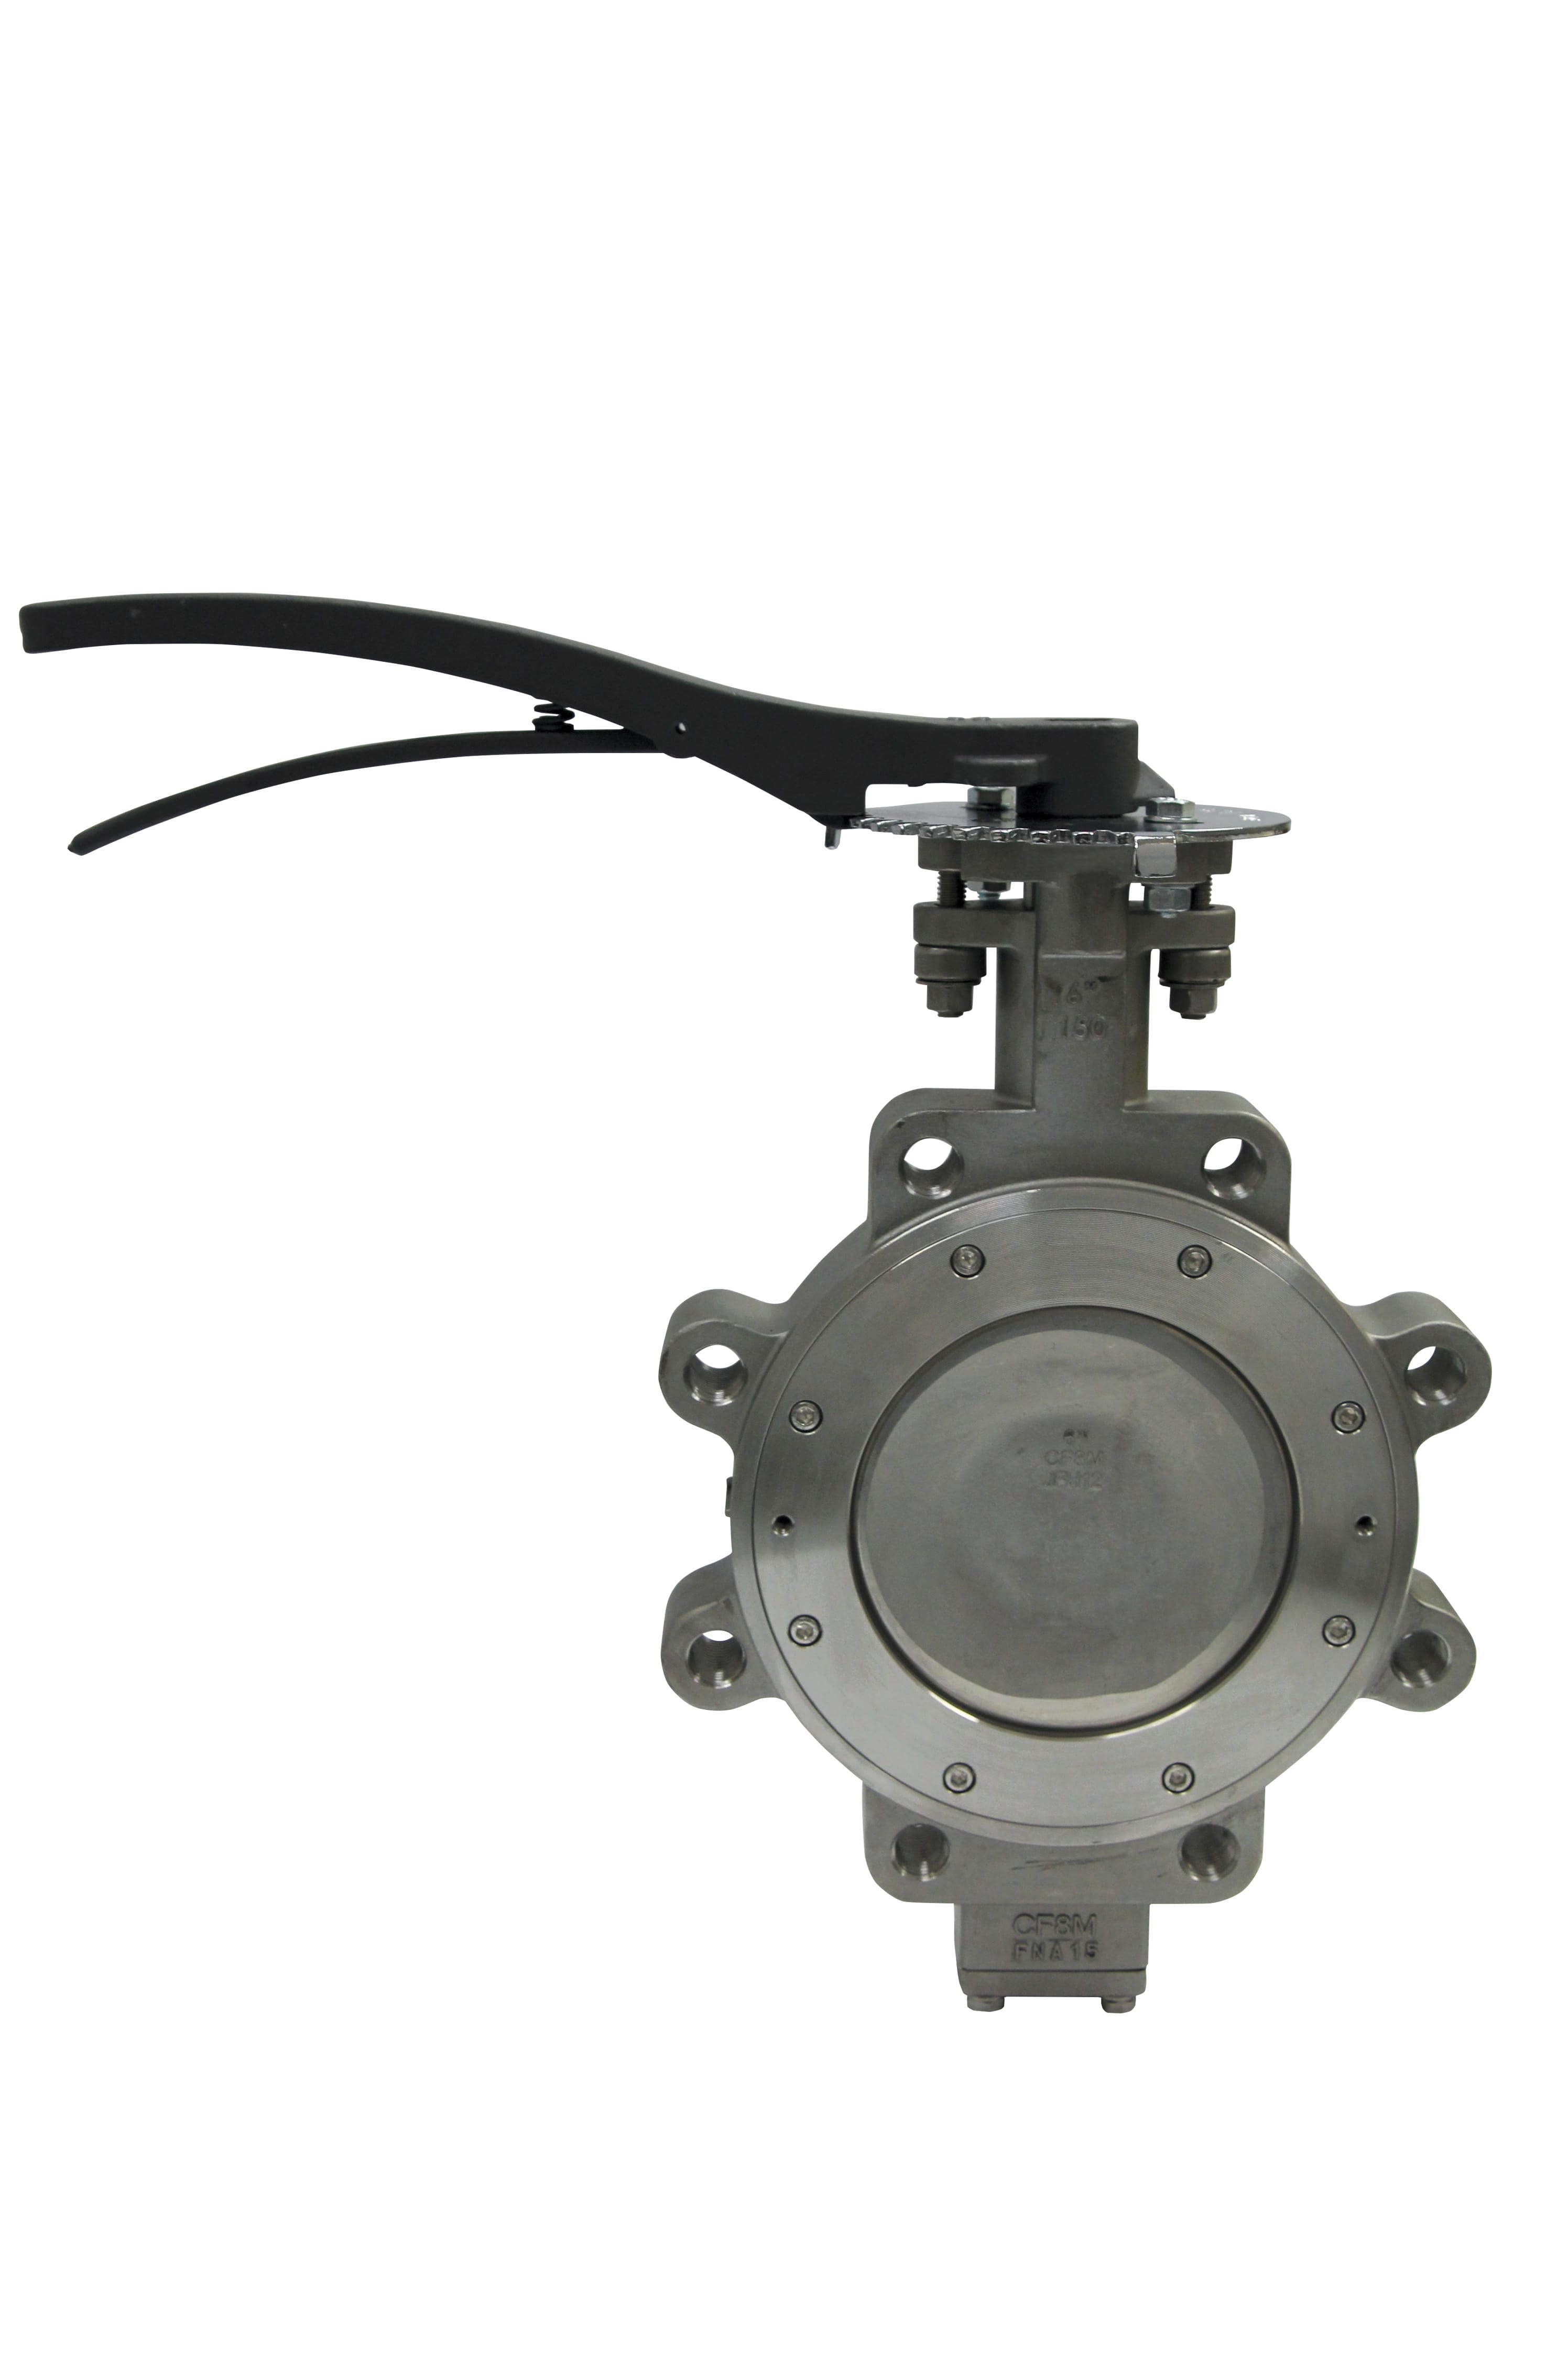 Preview image for Apollo Class 300 Stainless Steel Butterfly Valve with Stainless Steel Disc, 17-4 PH SS Stem & Pin, TFM/INCONEL Seats, Graphite Seals, NACE MR0103 Compliant, Bare Stem (2 x Lug Type)